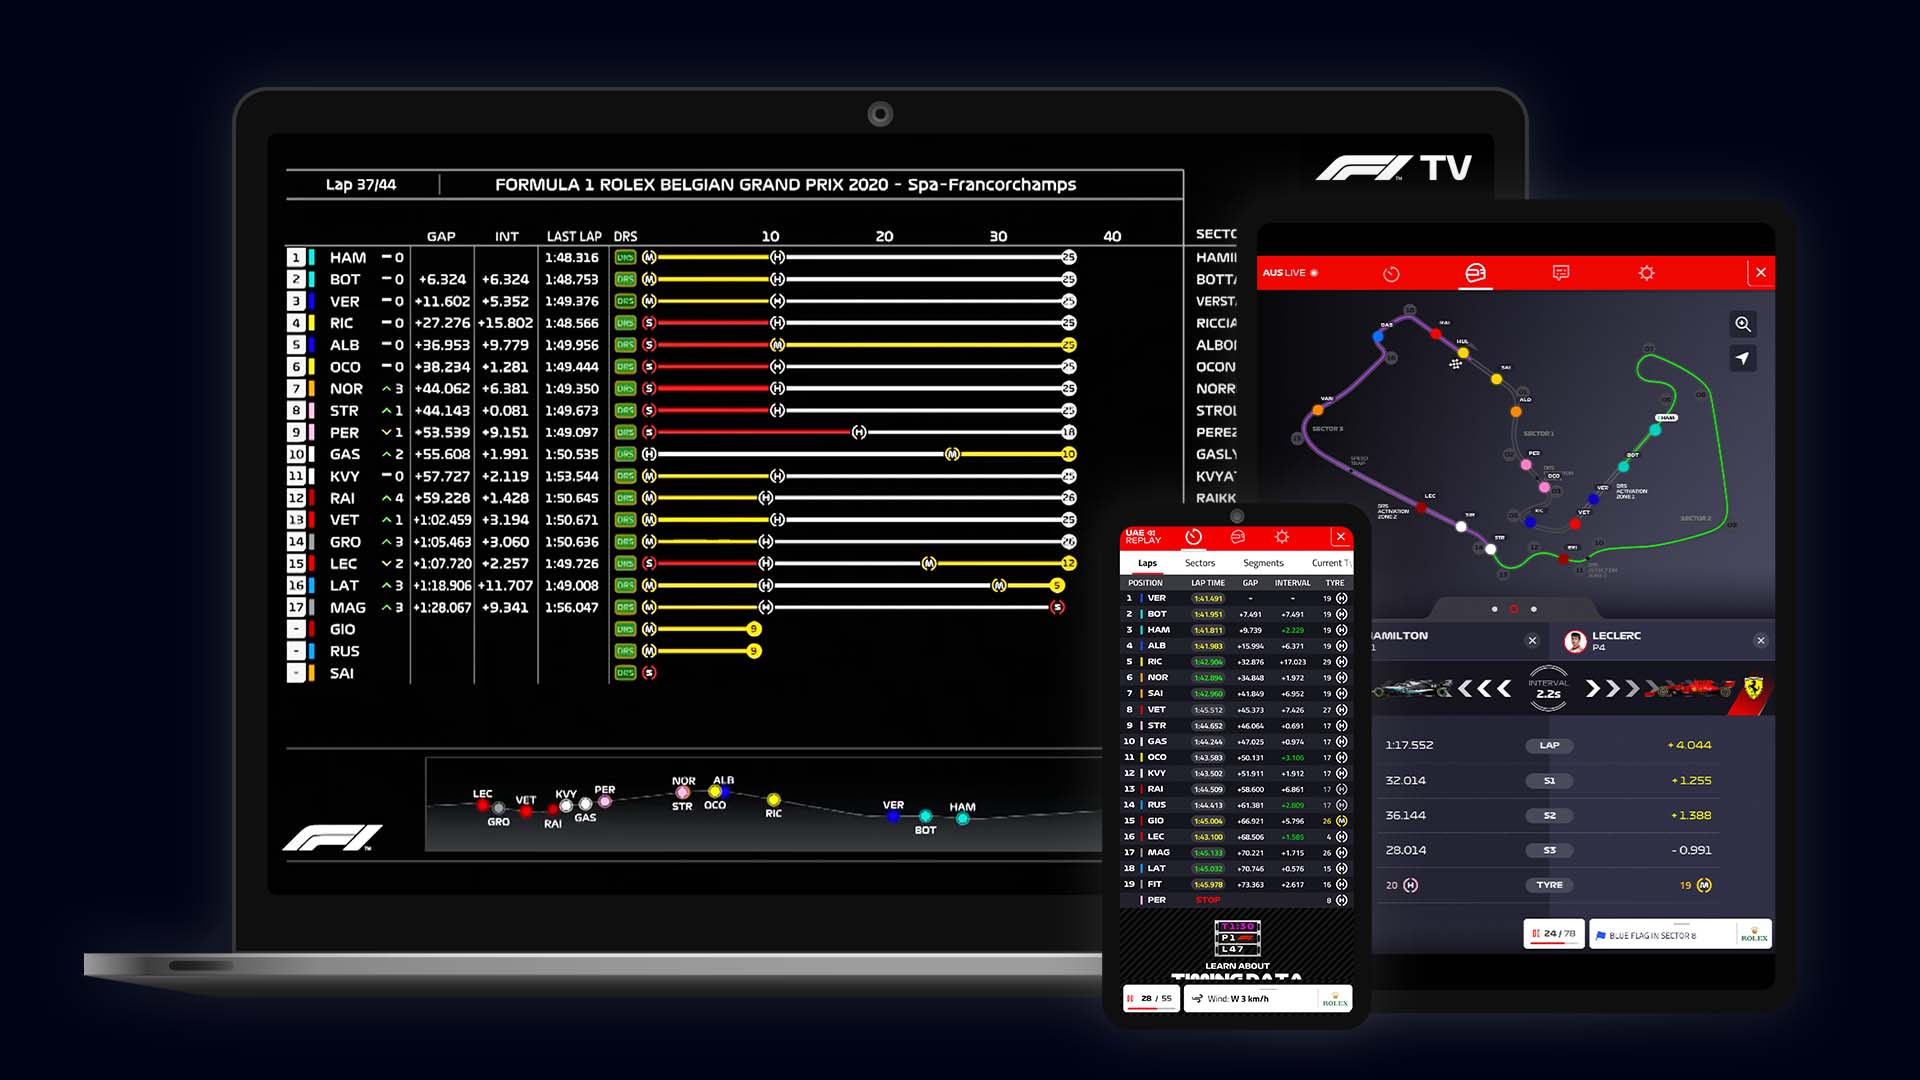 F1 TV promotional image including driver data. August 2021